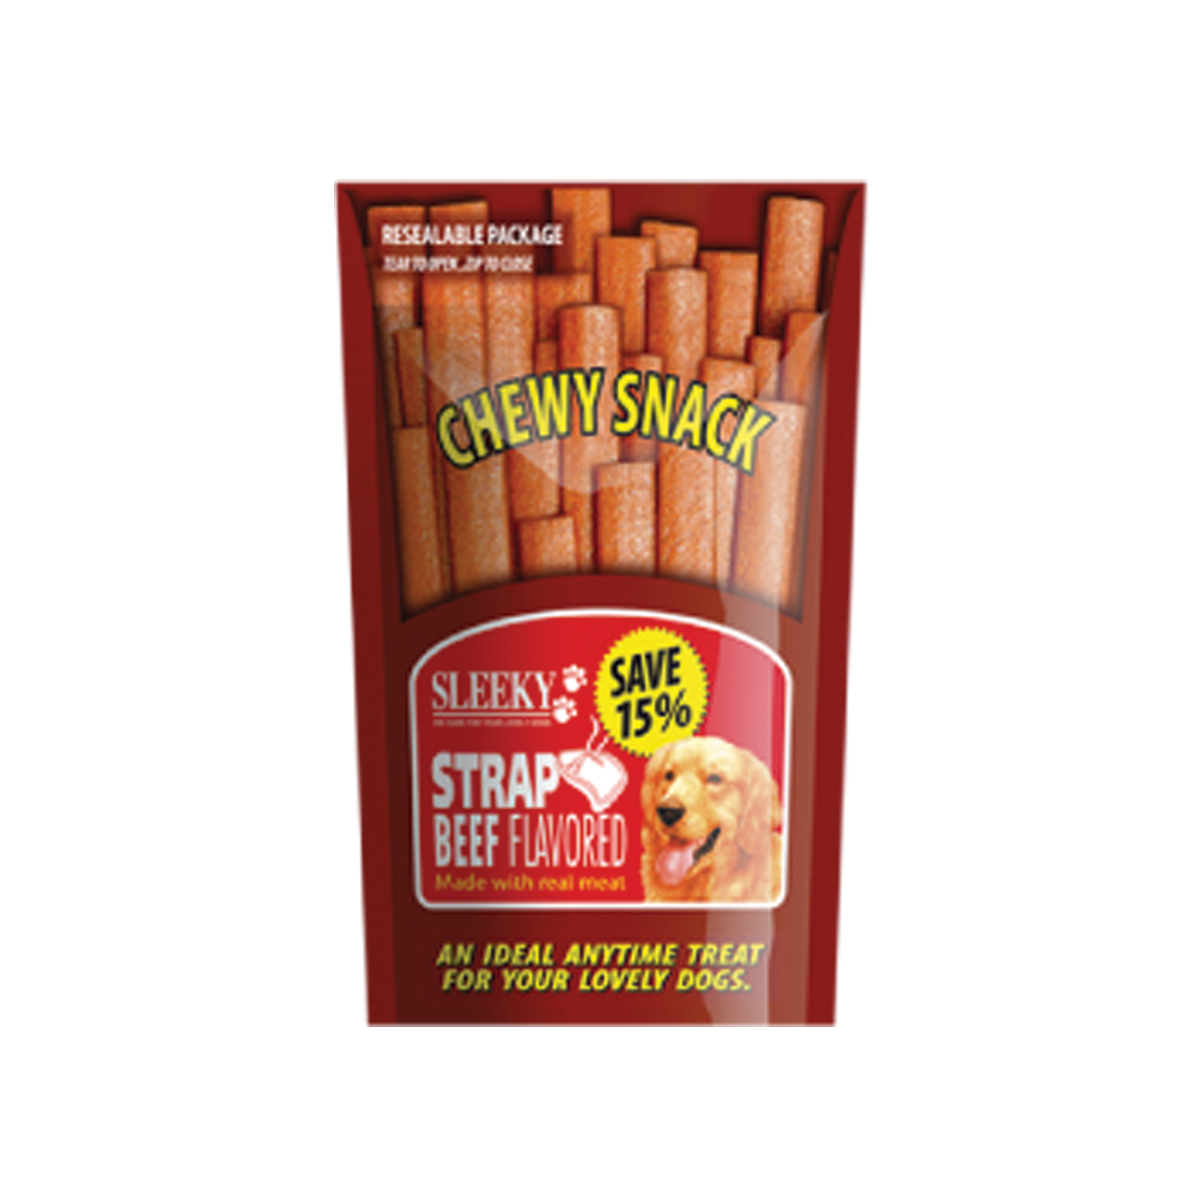 Sleeky- Chewy Stick Liver 175g